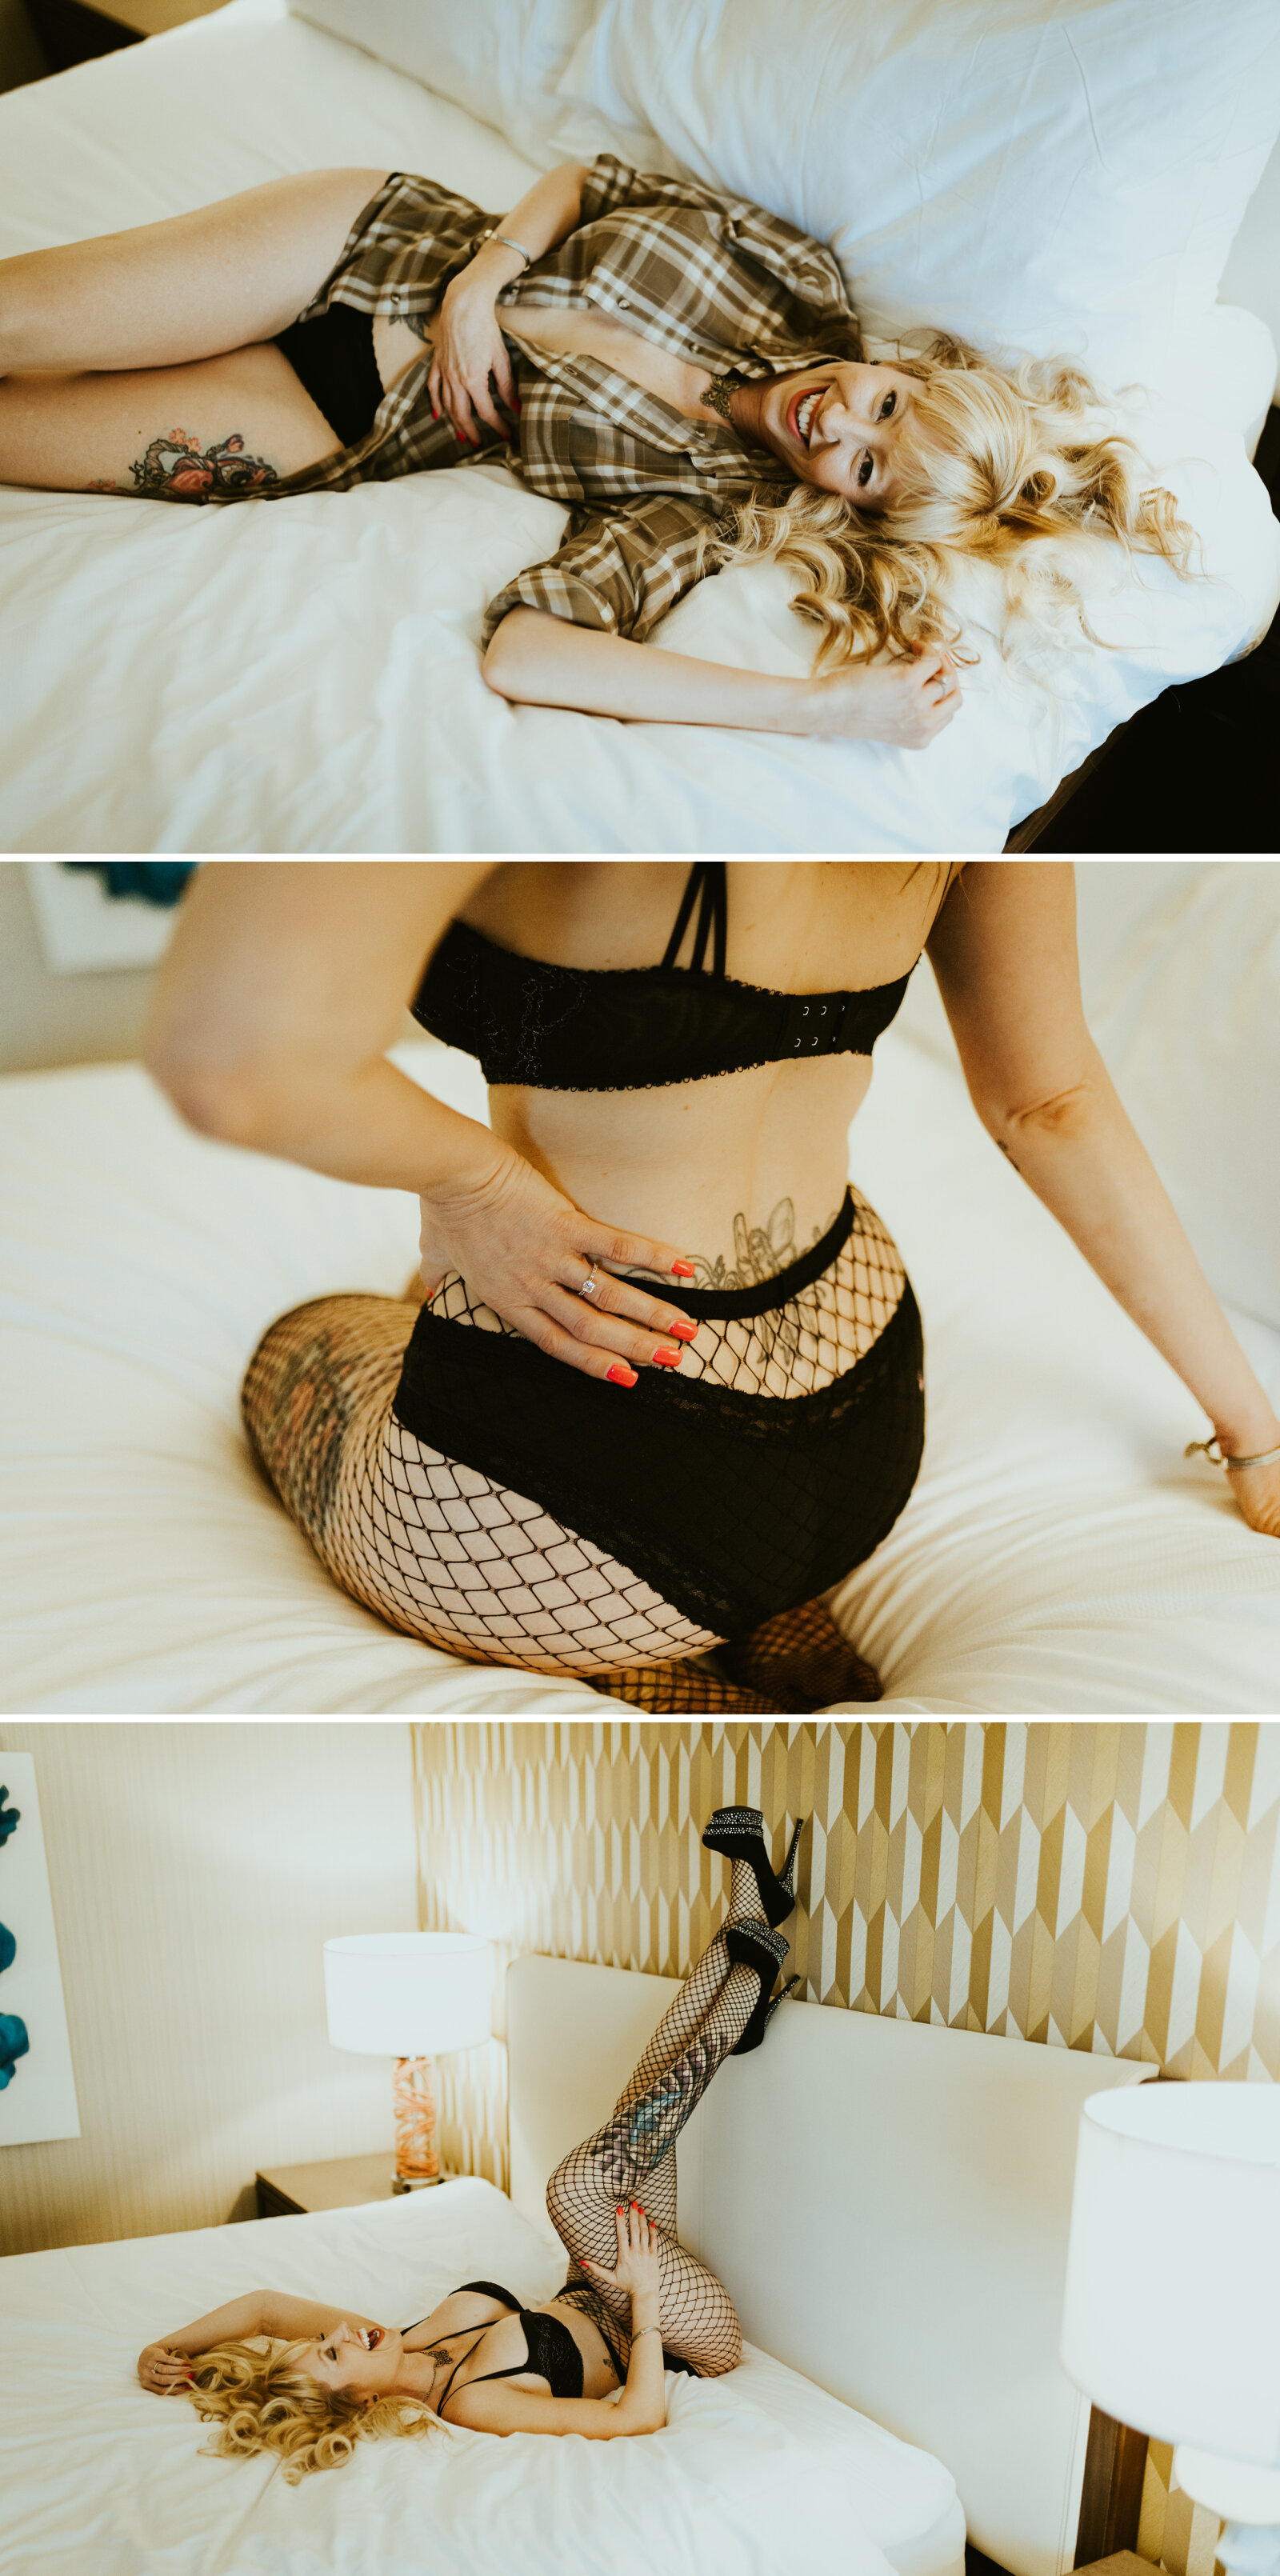 Boudoir photos taken for self empowerment a woman laying in a bed laughing.jpg